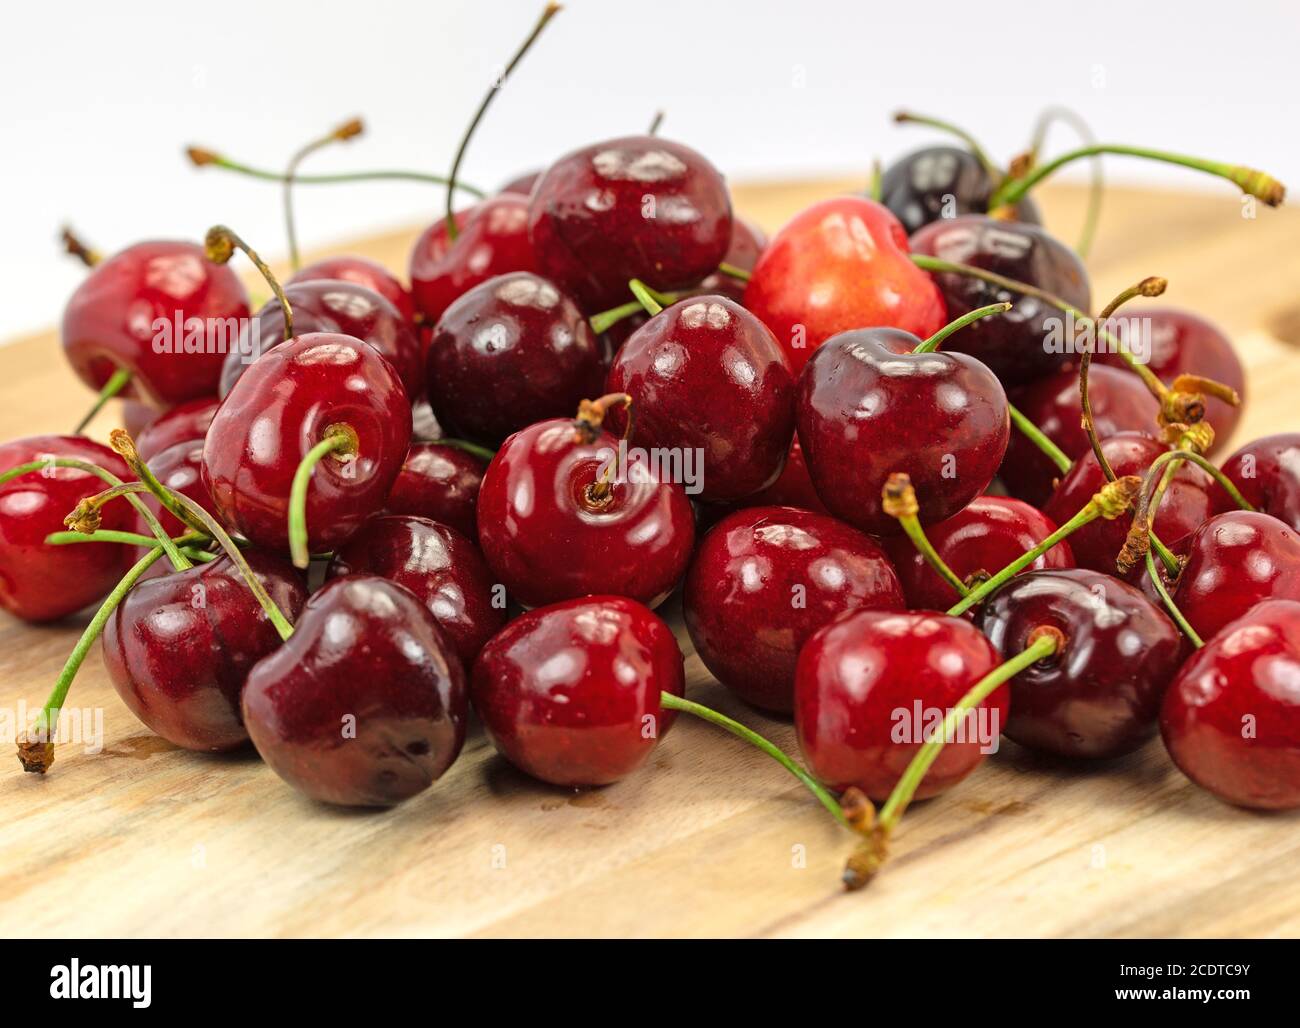 Sweet cherries on a wooden plate Stock Photo